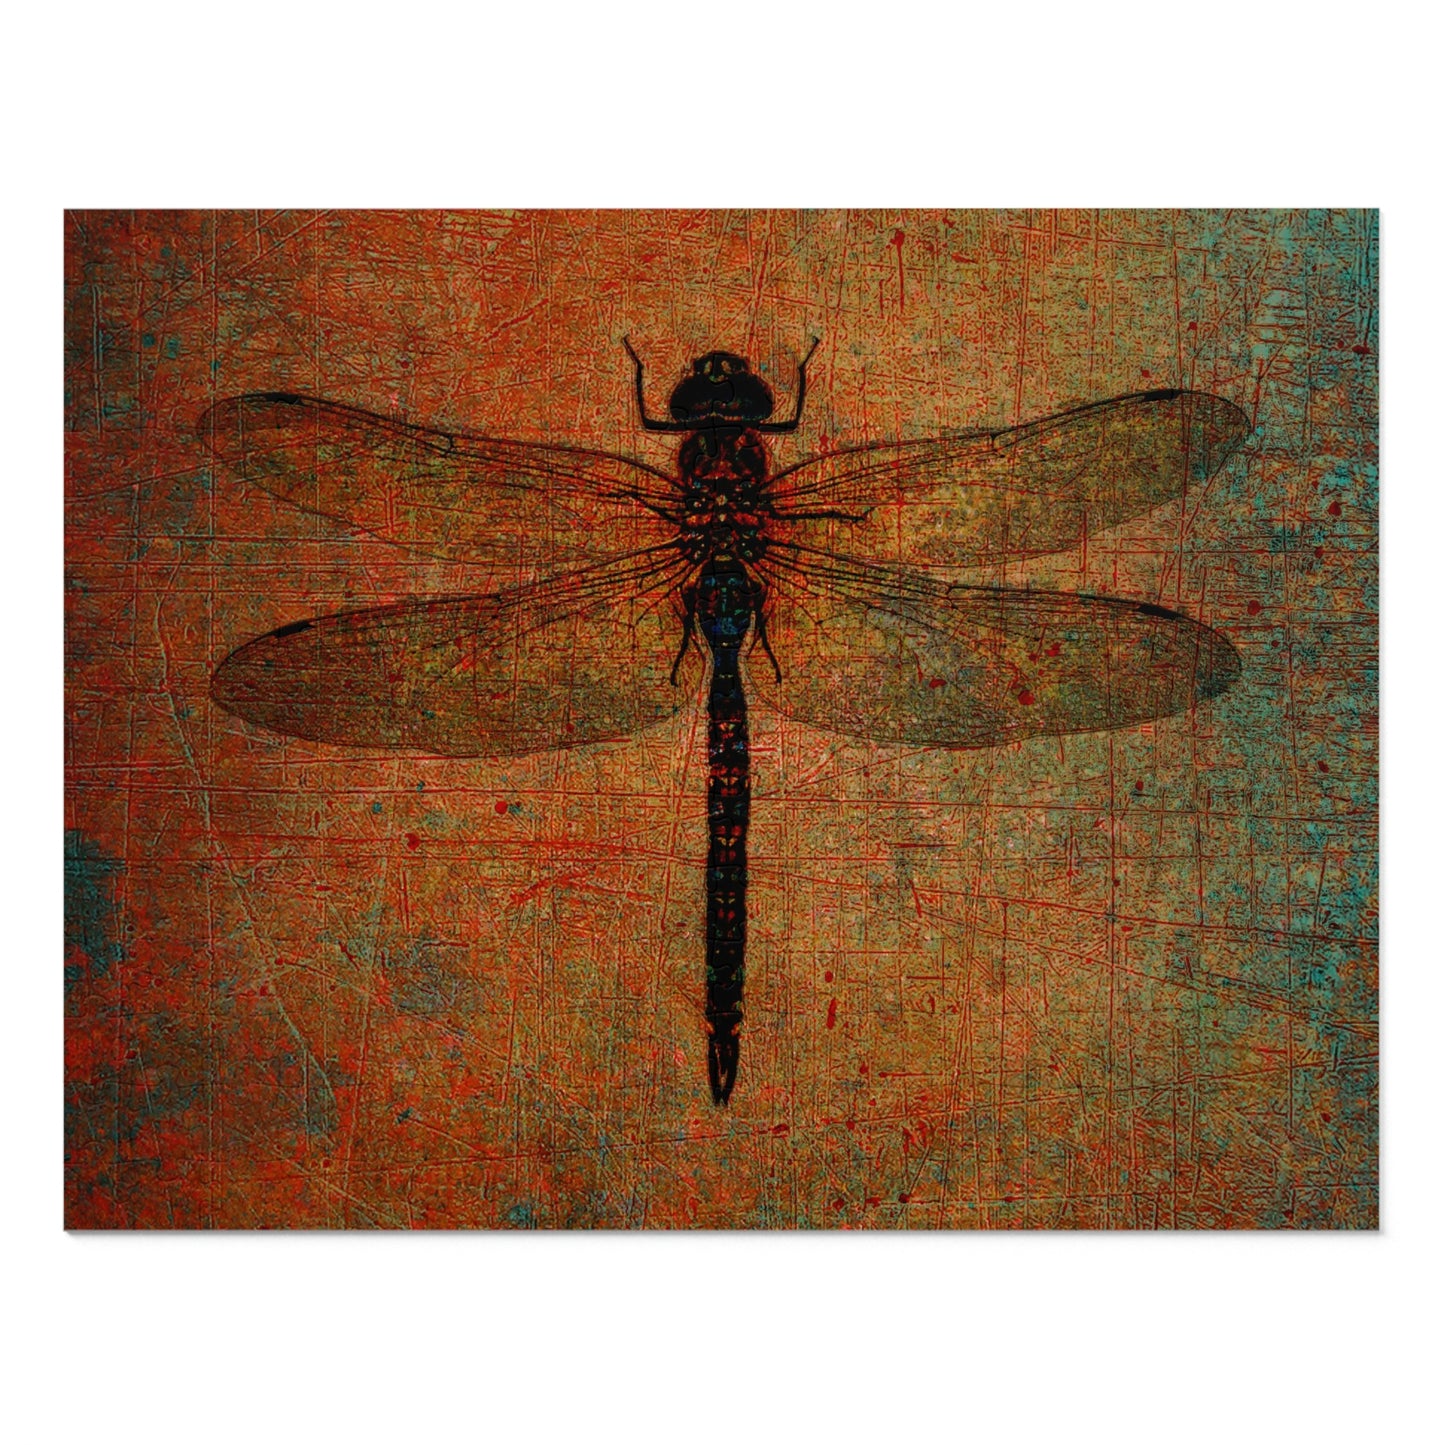 Dragonfly on Brown Stone Background Puzzle 250 pieces